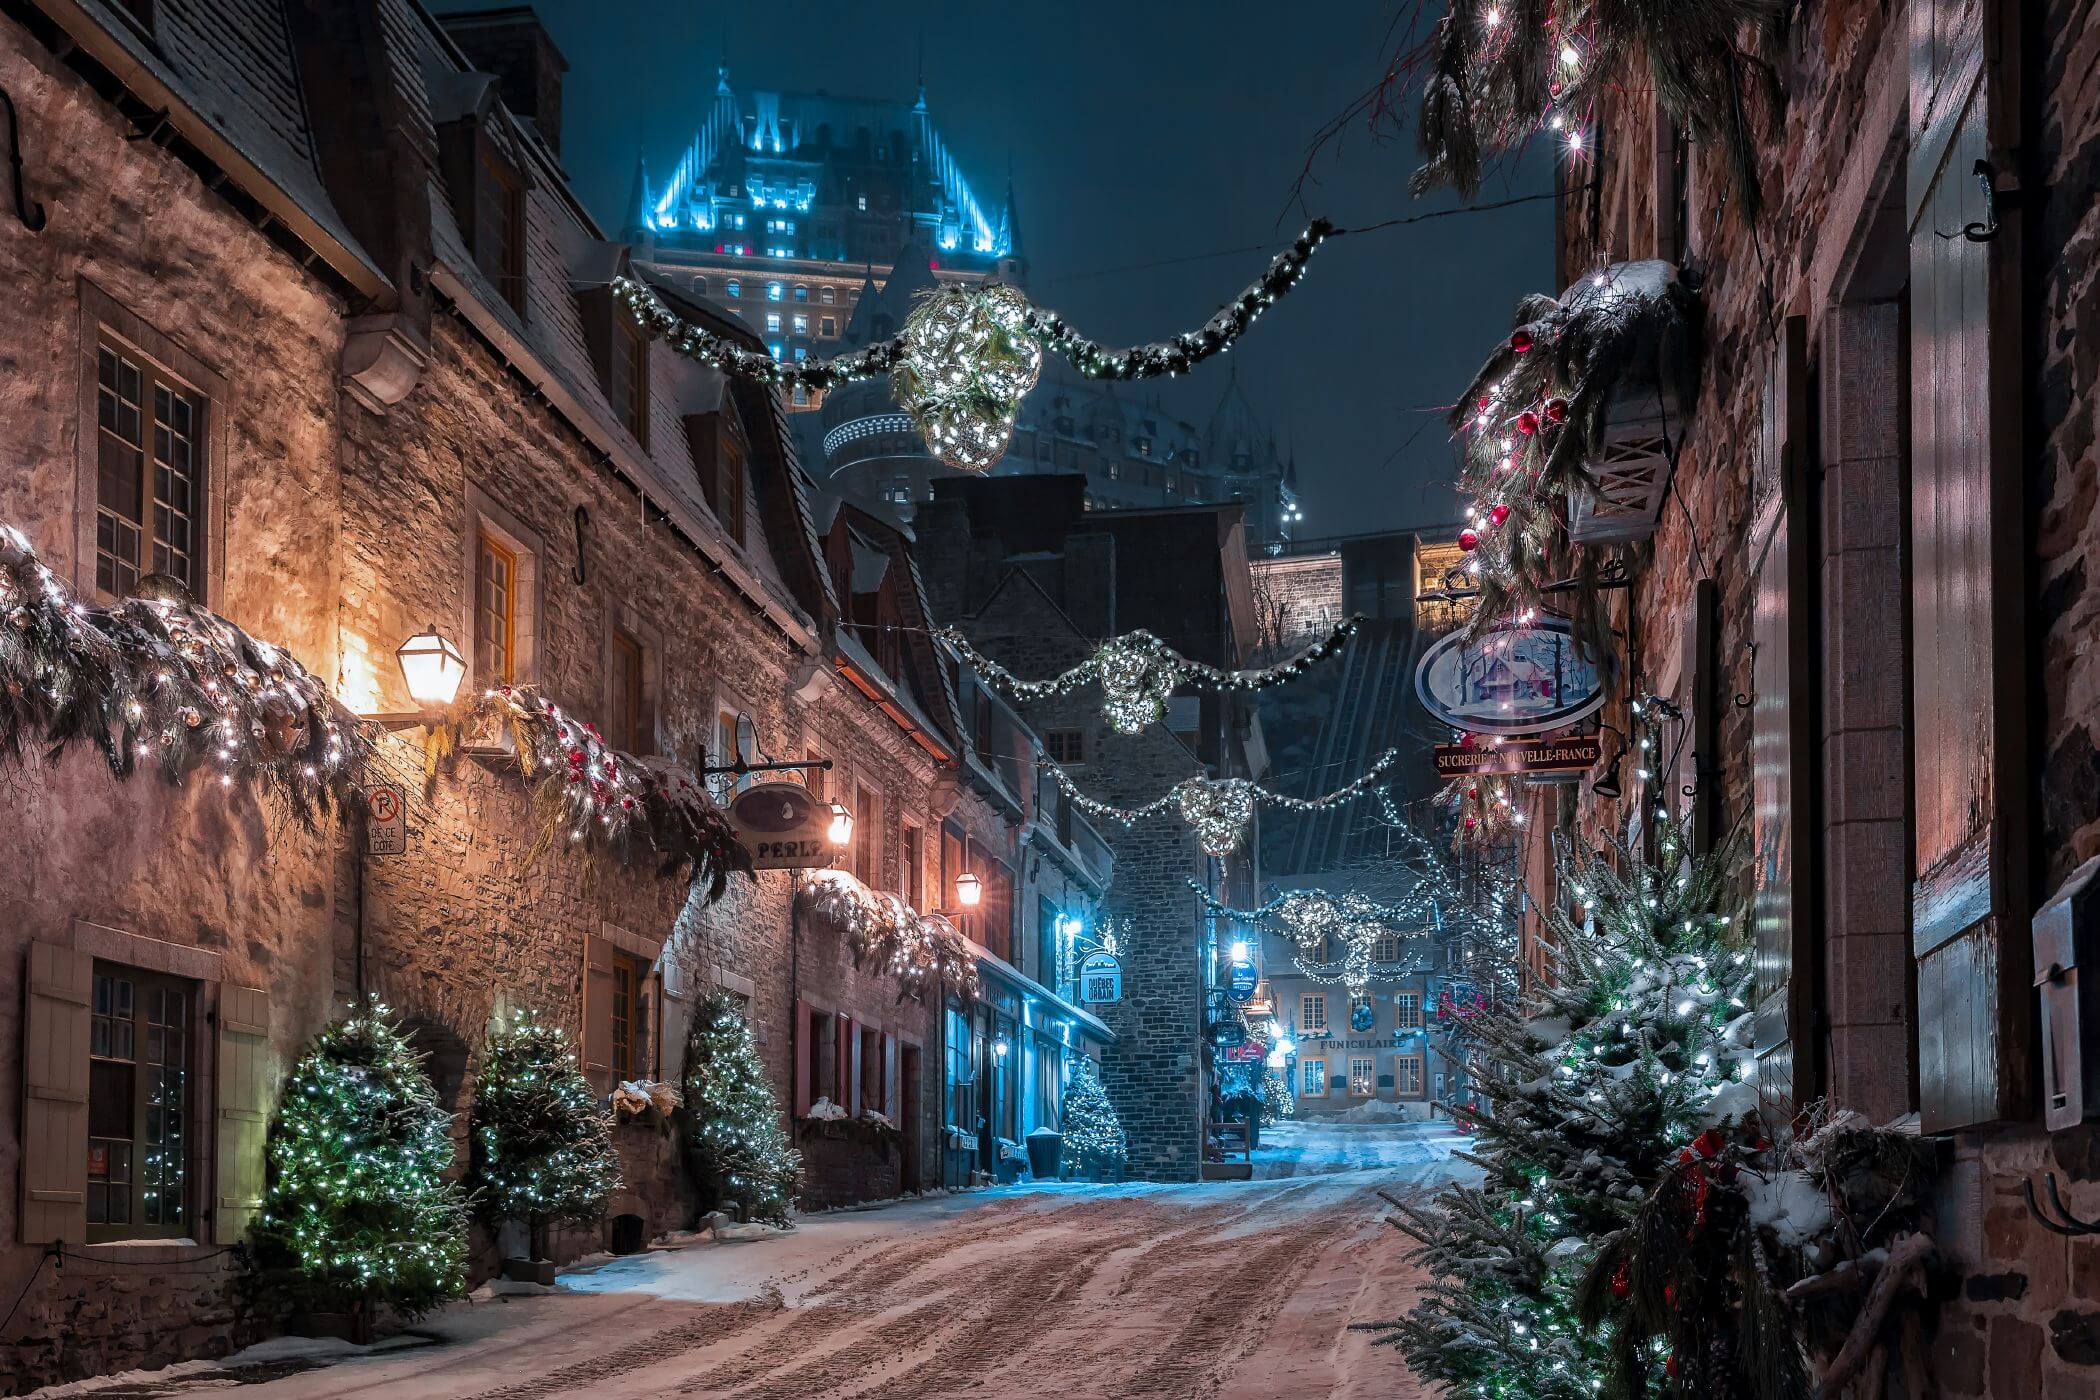 Quebec with winter lights